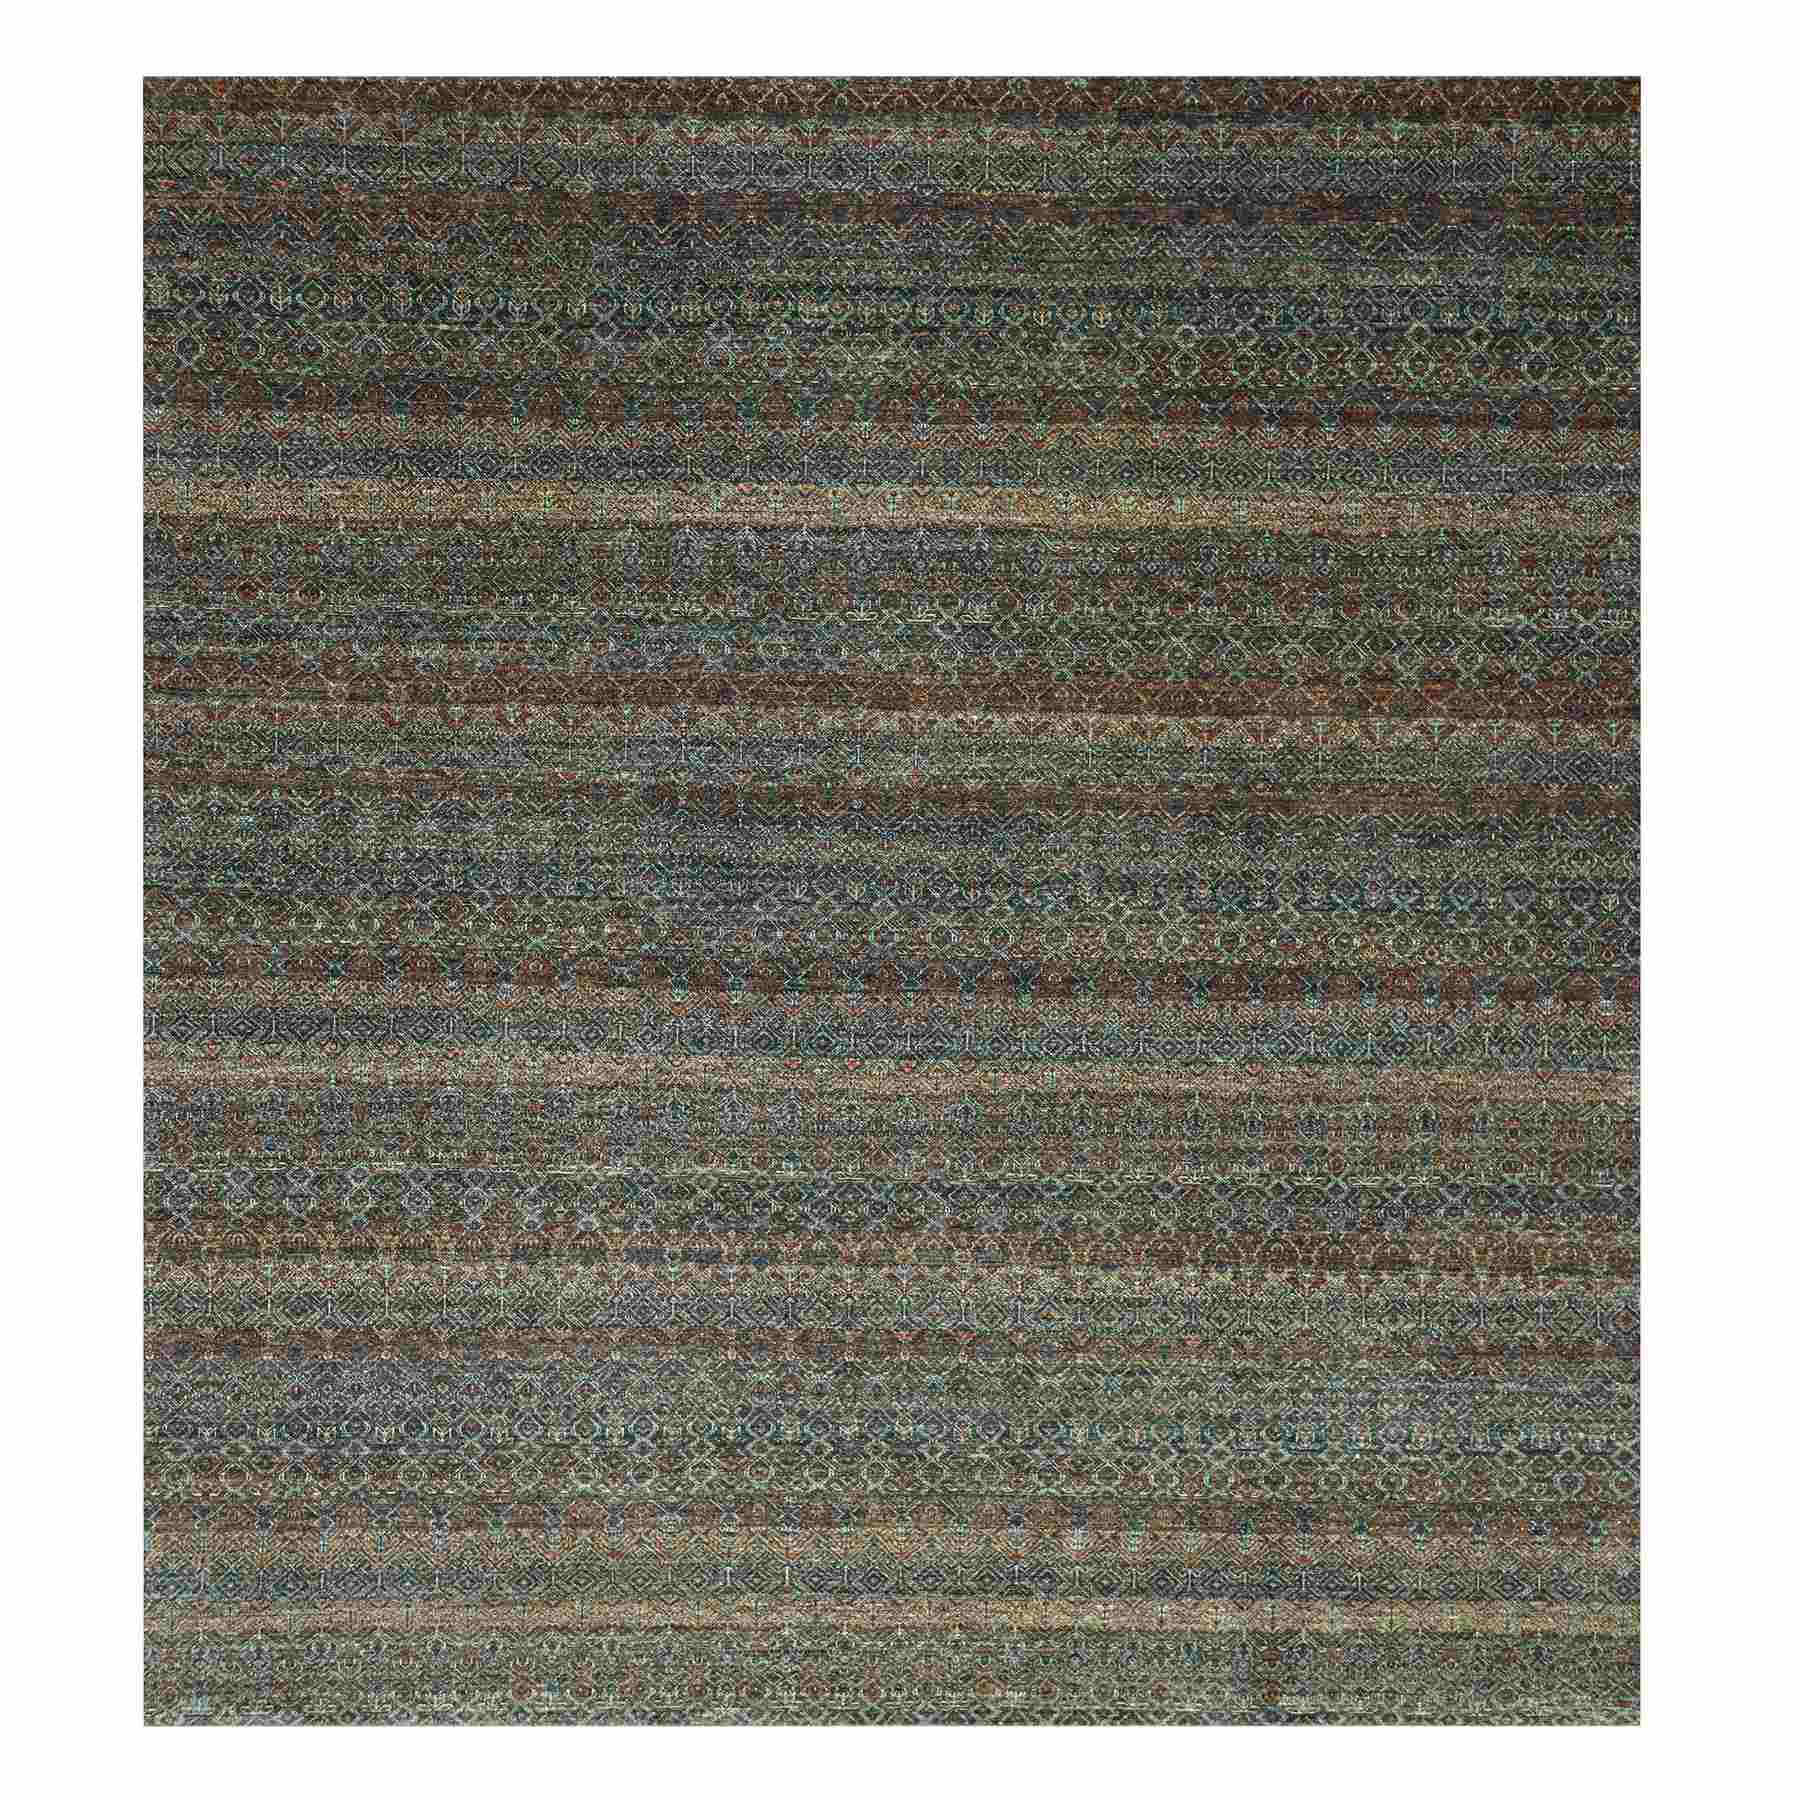 Modern-and-Contemporary-Hand-Knotted-Rug-397270